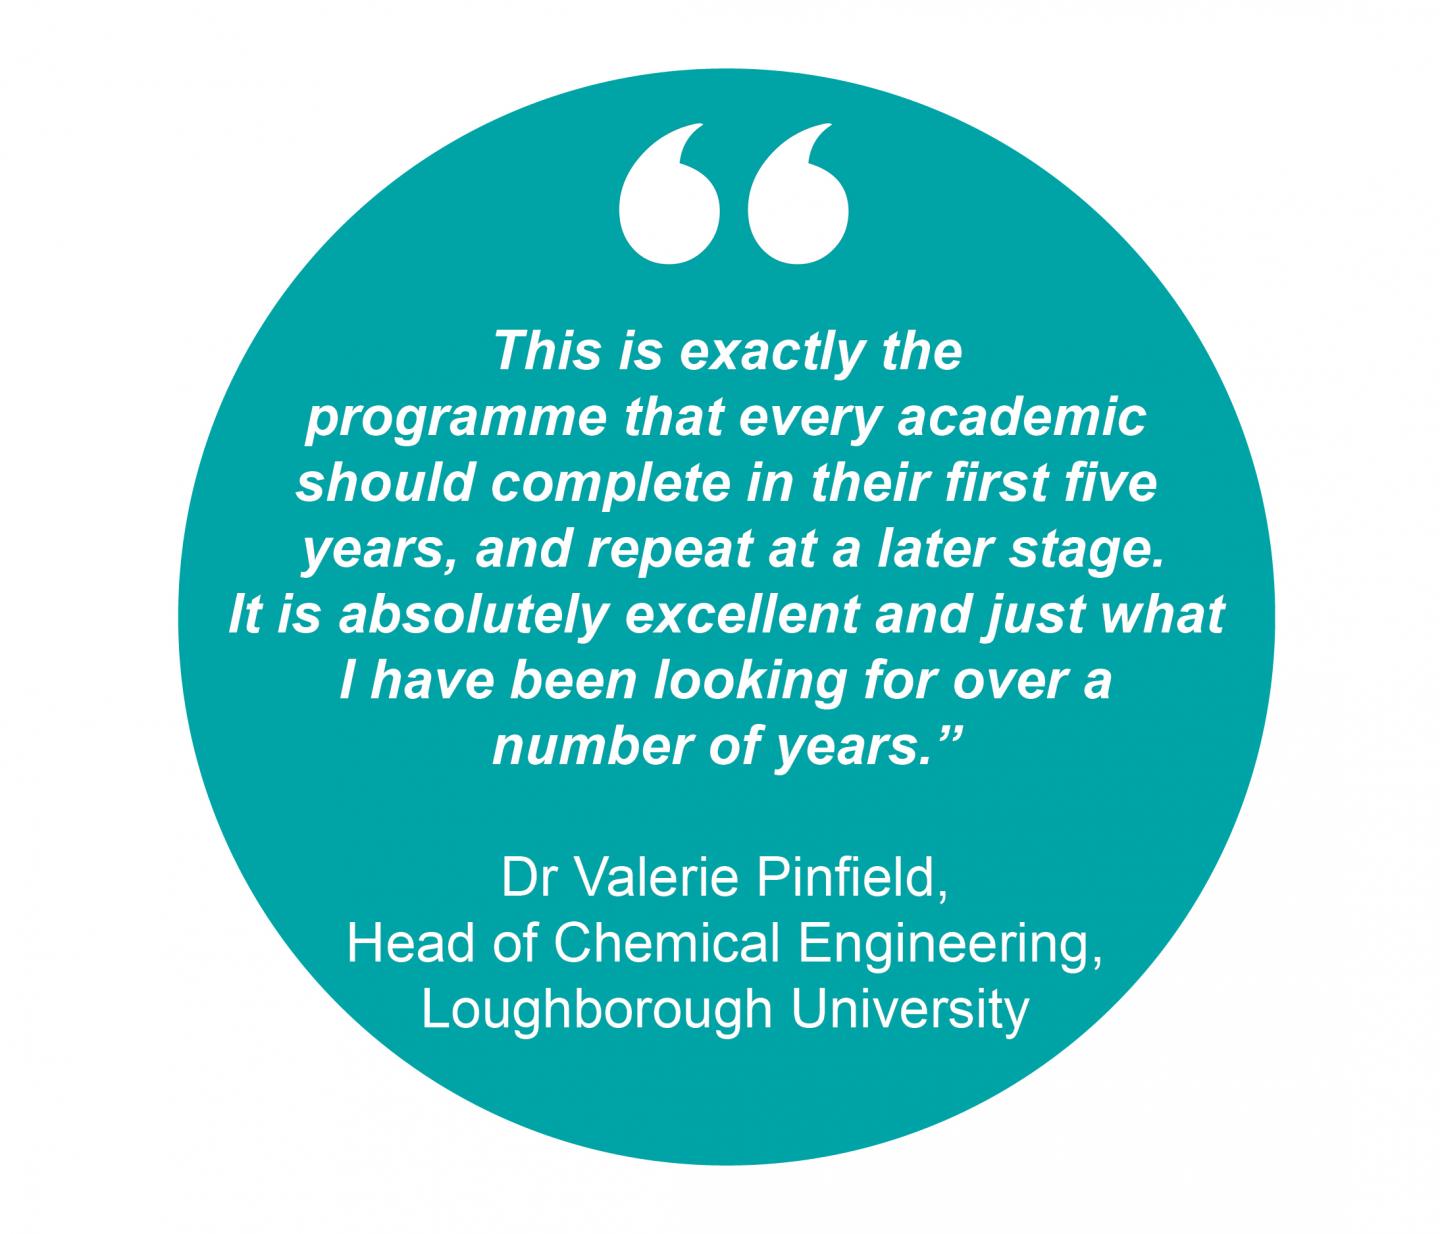 "This is exactly the programme that every academic should complete in their first five years, and repeat at a later stage. It is absolutely excellent and just what I have been looking for over a number of years.” Dr Valerie Pinfield, Head of Chemical Engineering, Loughborough University